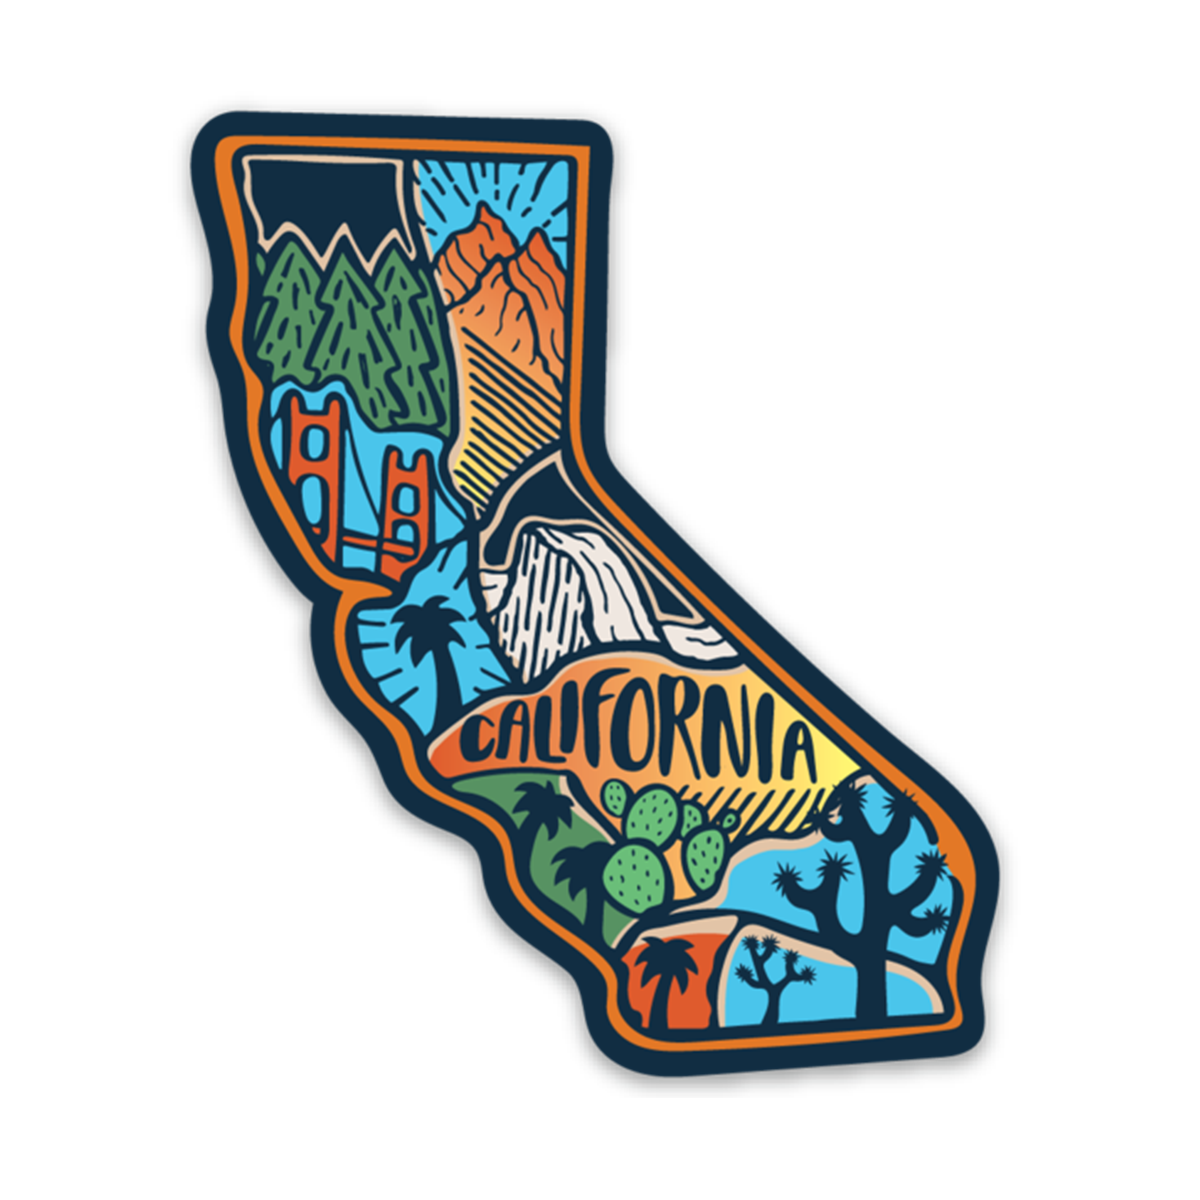 California state sticker by Keep Nature Wild